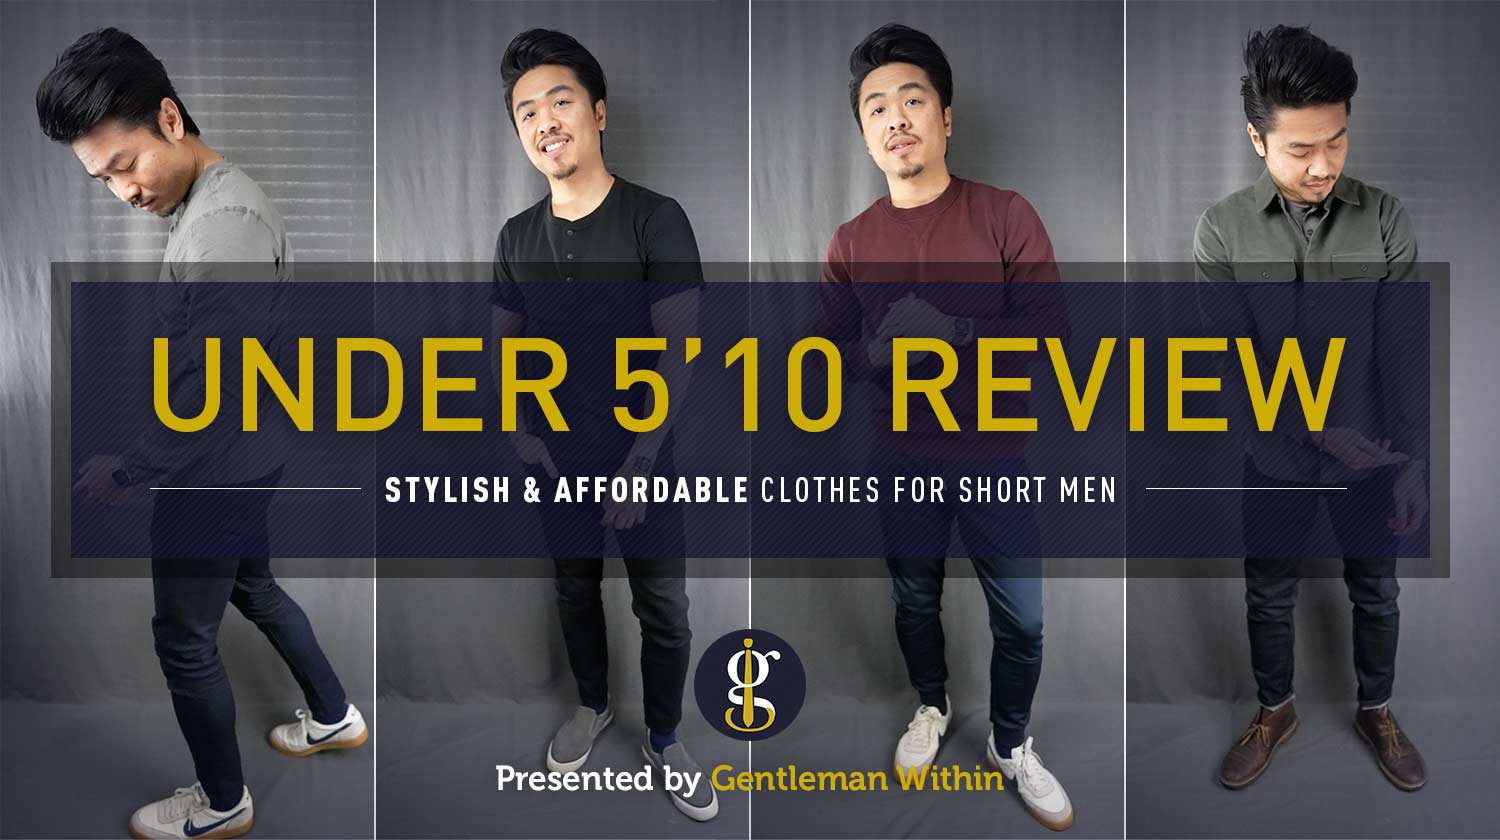 Under 5'10 Review: Stylish & Affordable Clothes for Short Men | GENTLEMAN WITHIN